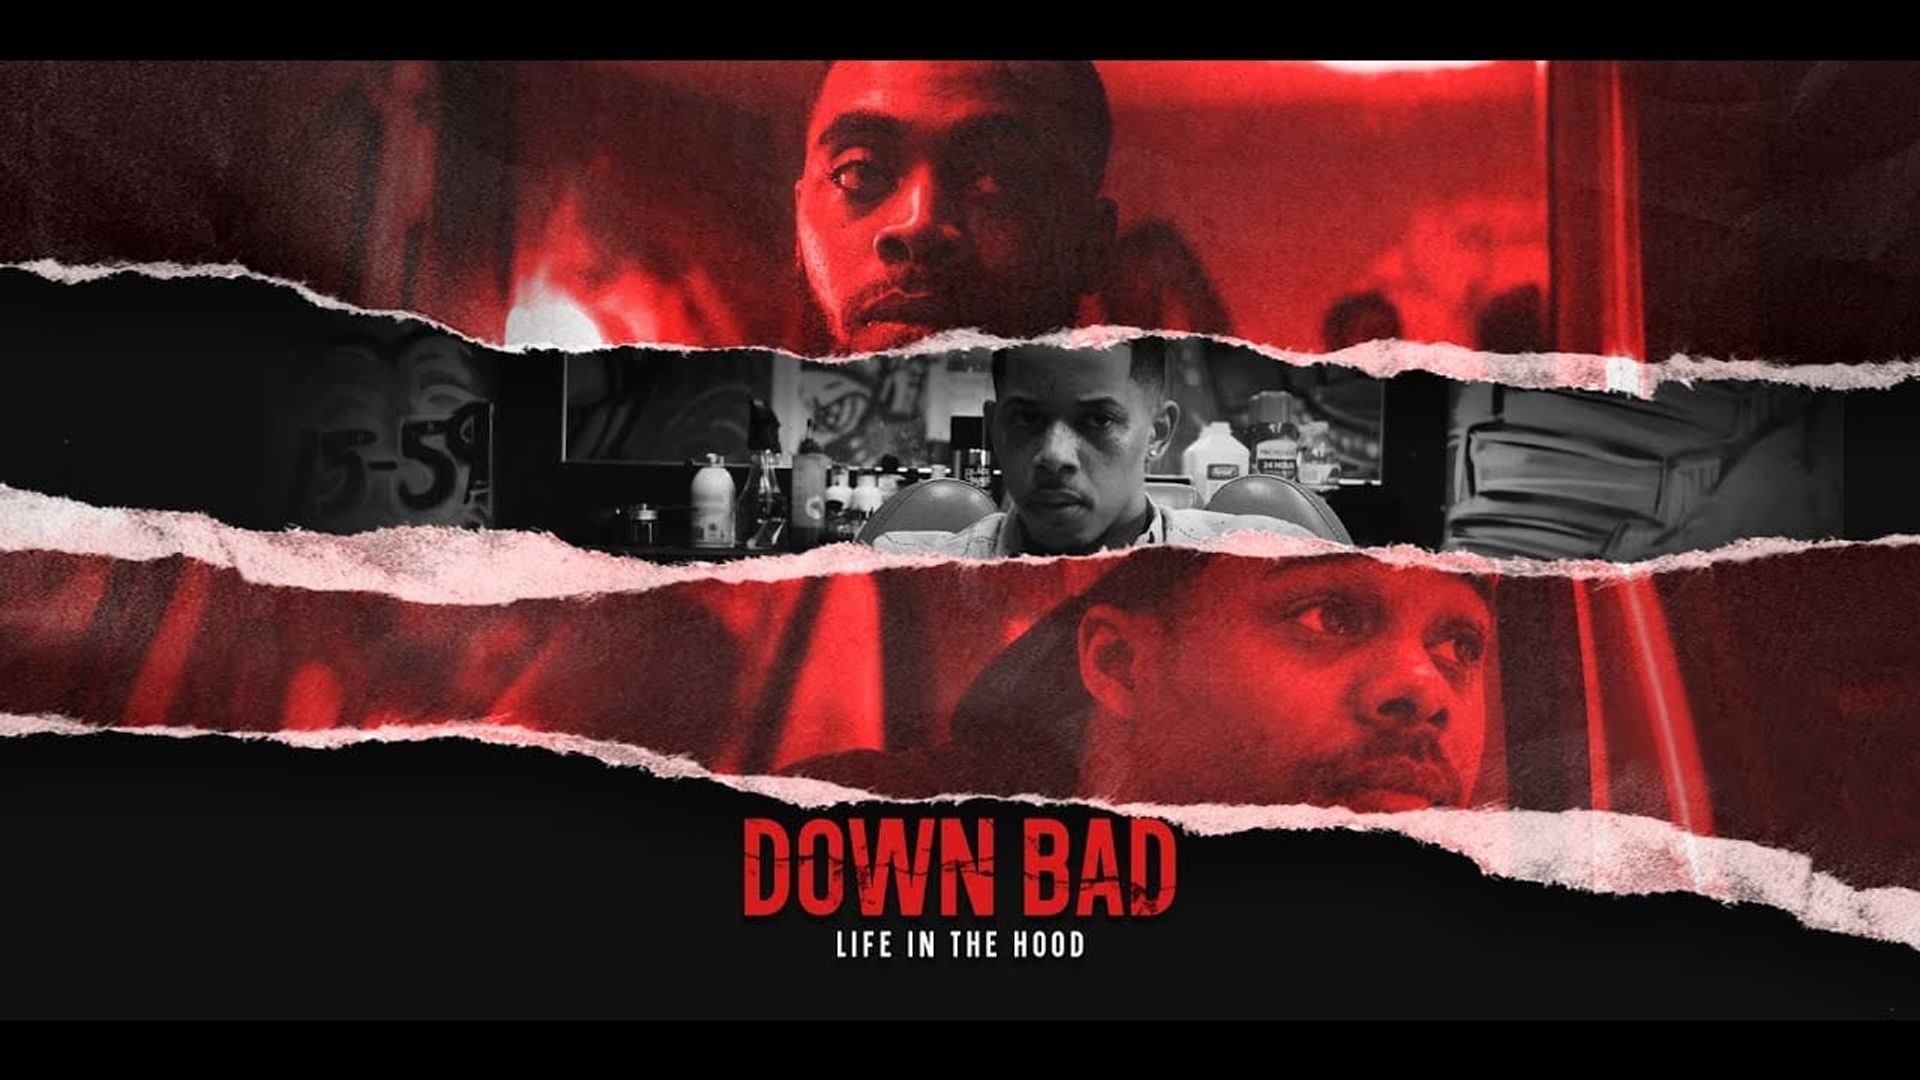 Down Bad: Life in the Hood background